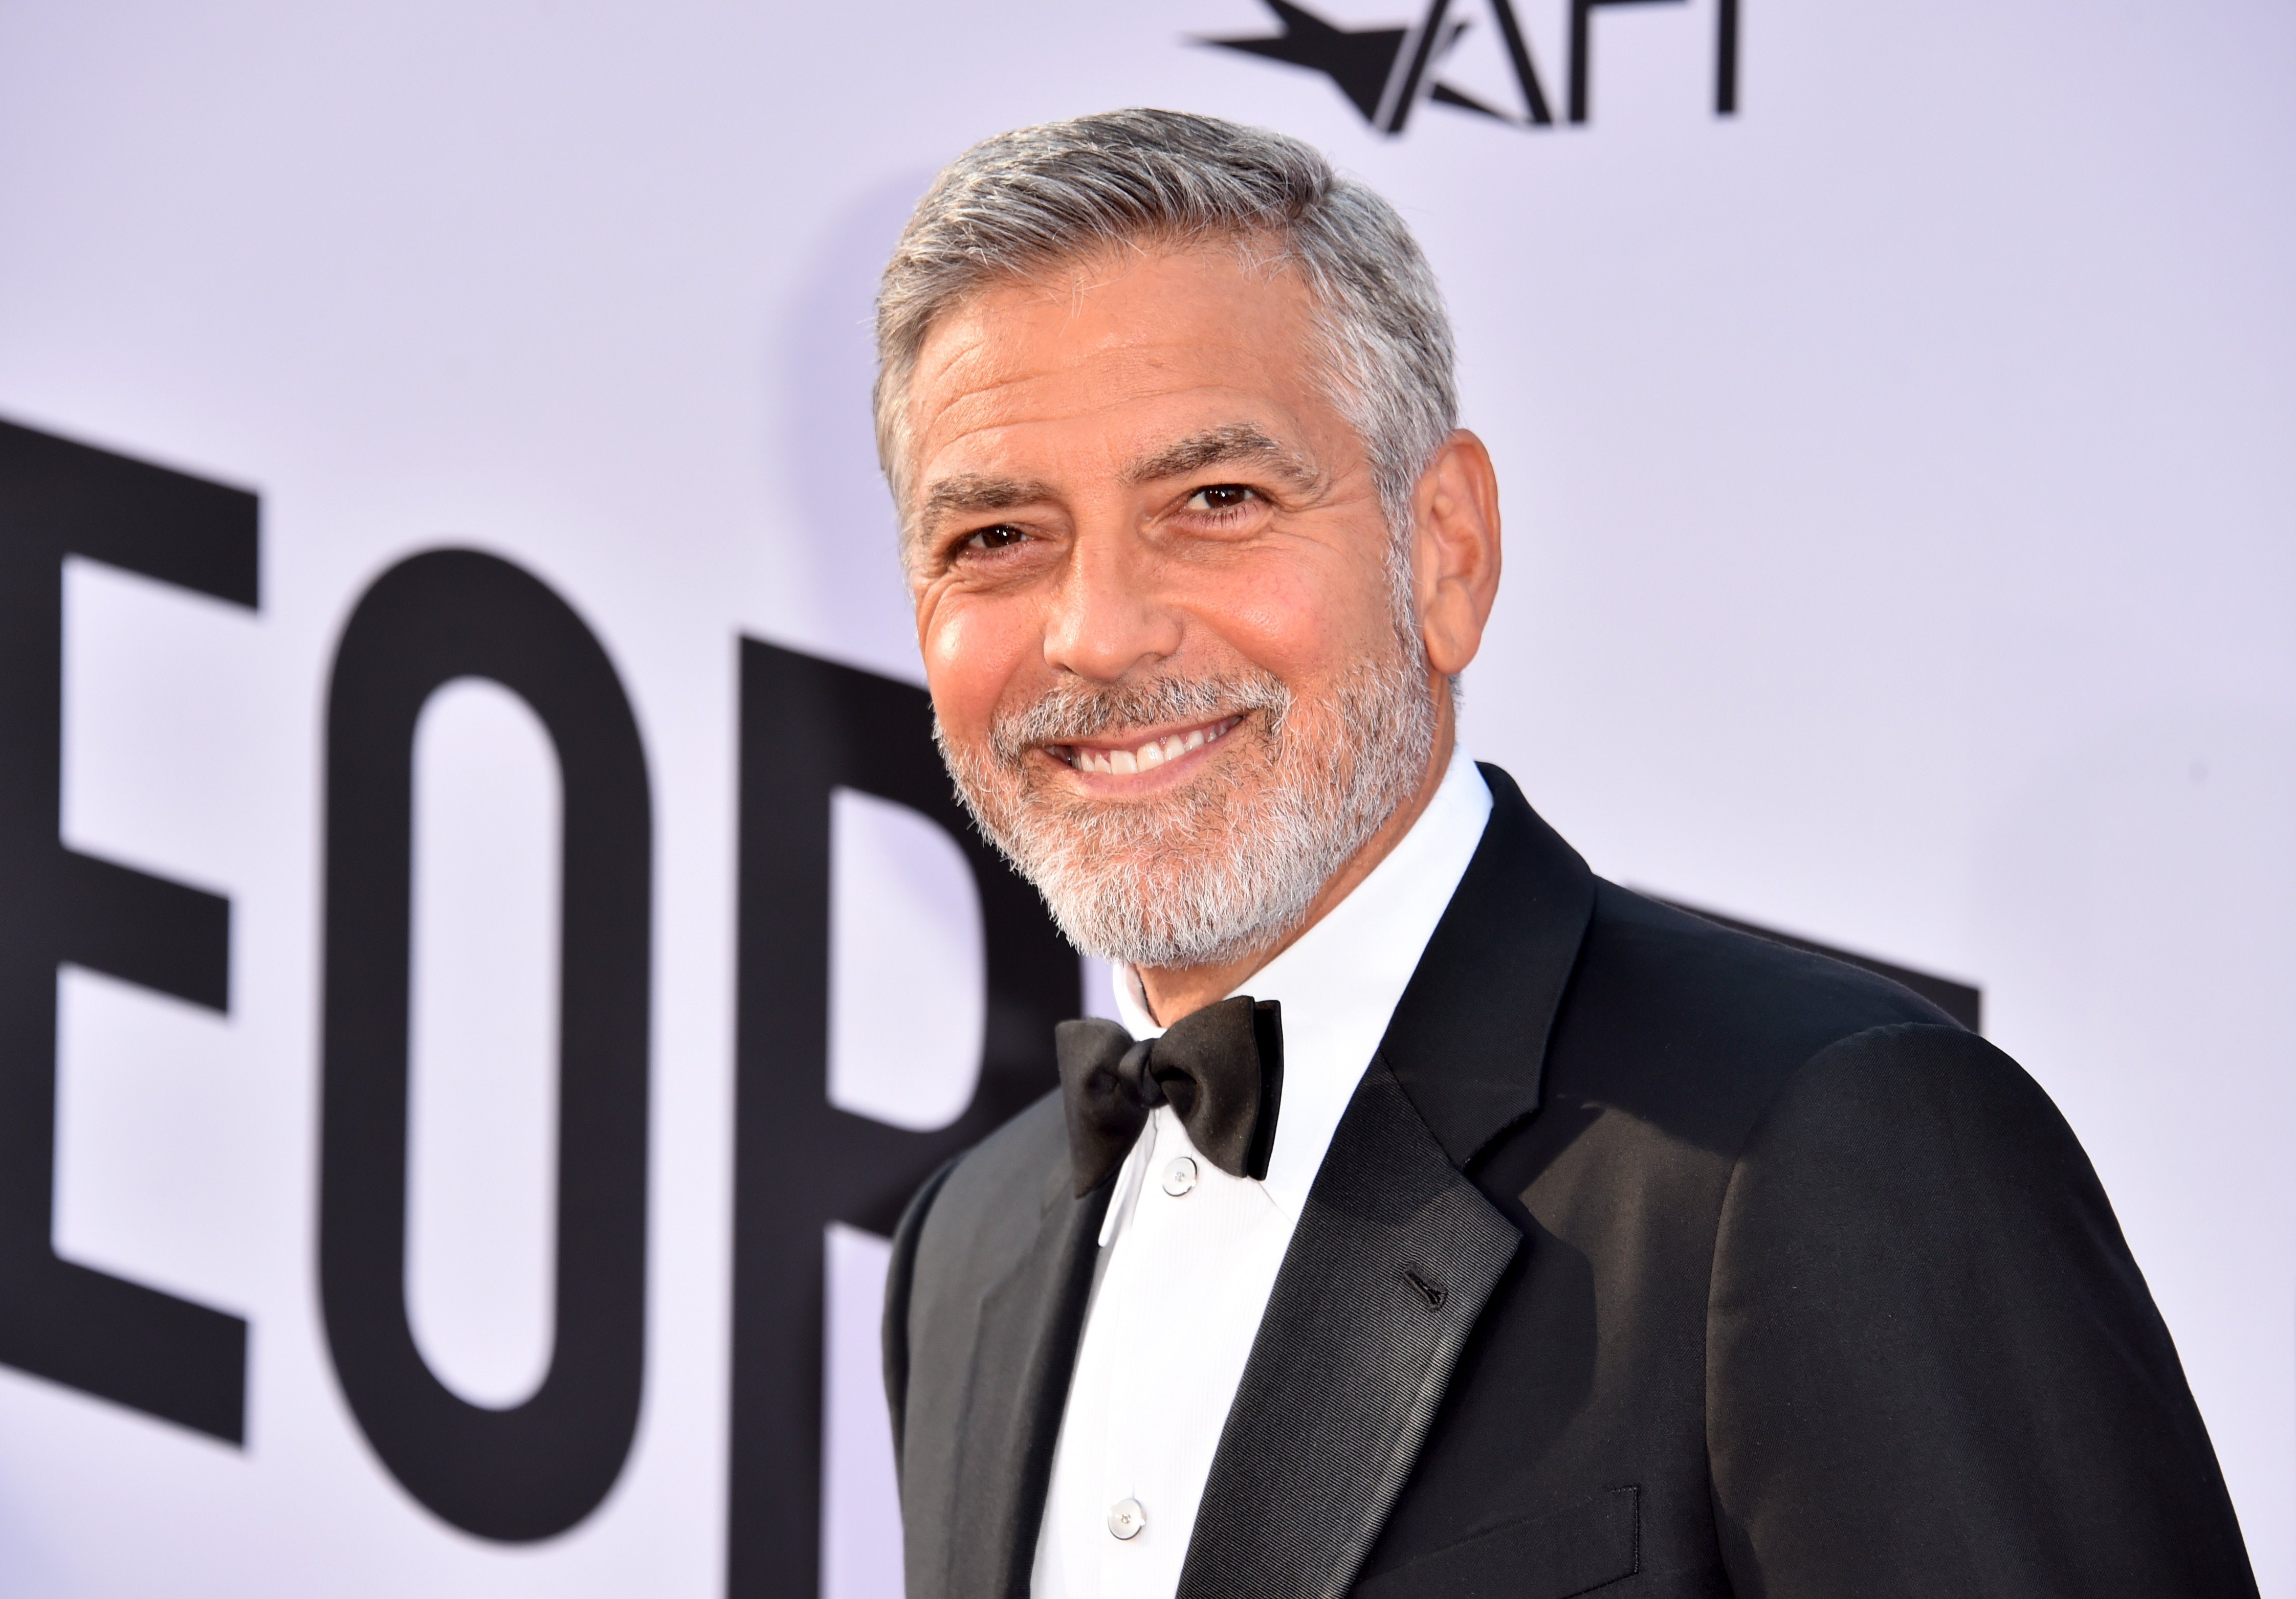 George Clooney at the 46th Life Achievement Award Gala in Hollywood, California on June 7, 2018 | Source: Getty Images